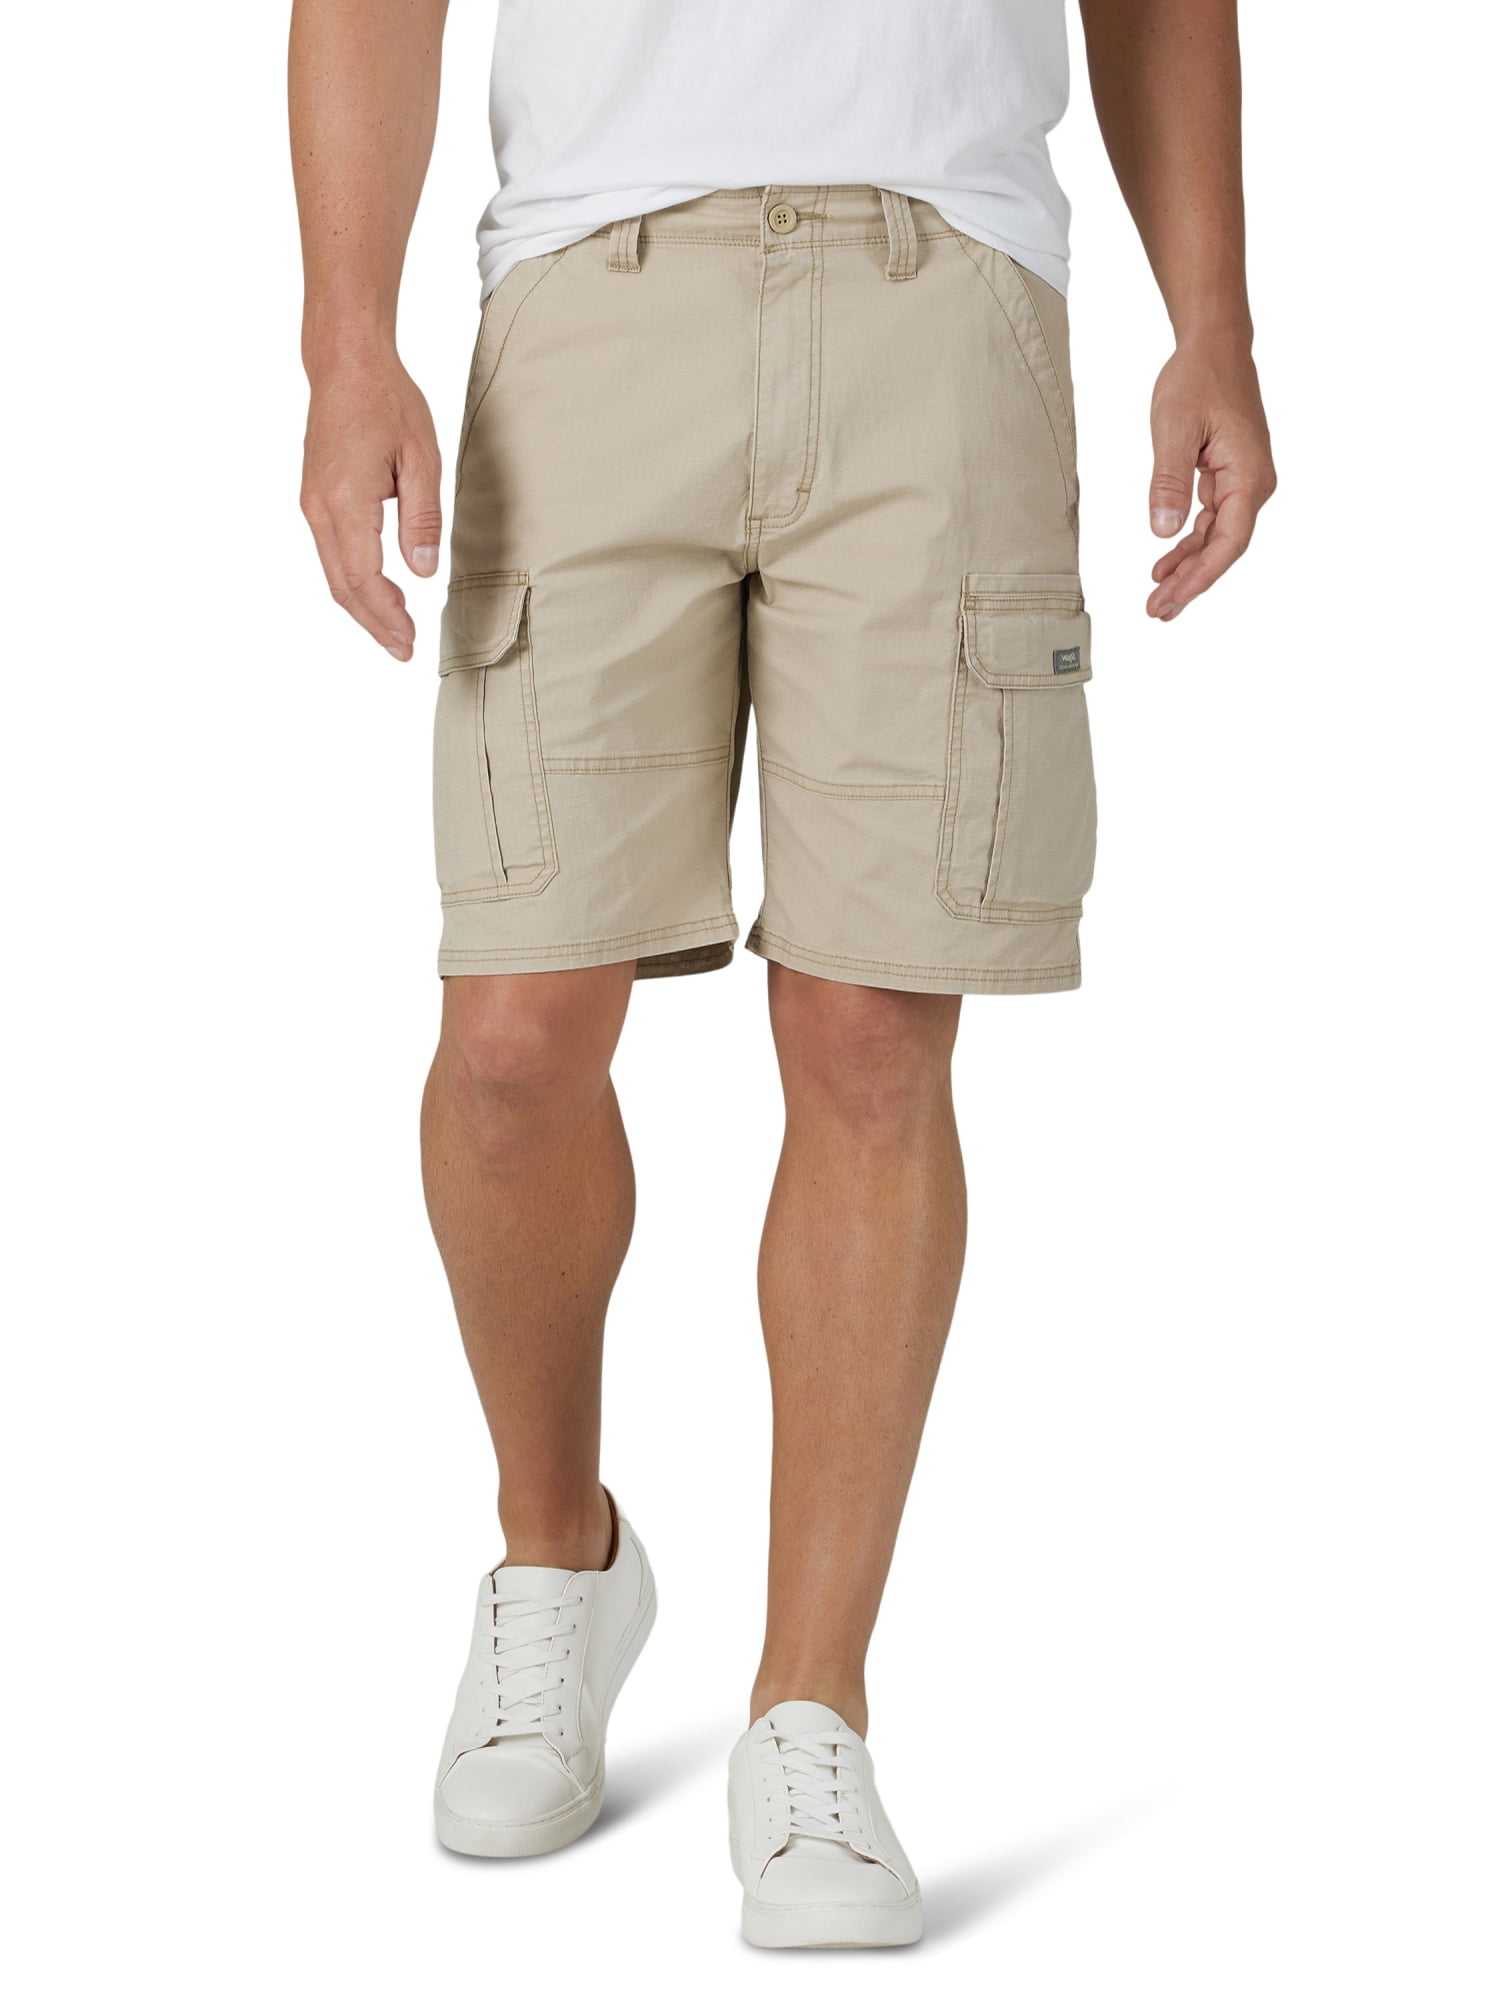 Men's Classic Relaxed Fit Stretch Cargo Short Comfort Knee Length Flat Front Shorts with Pockets 